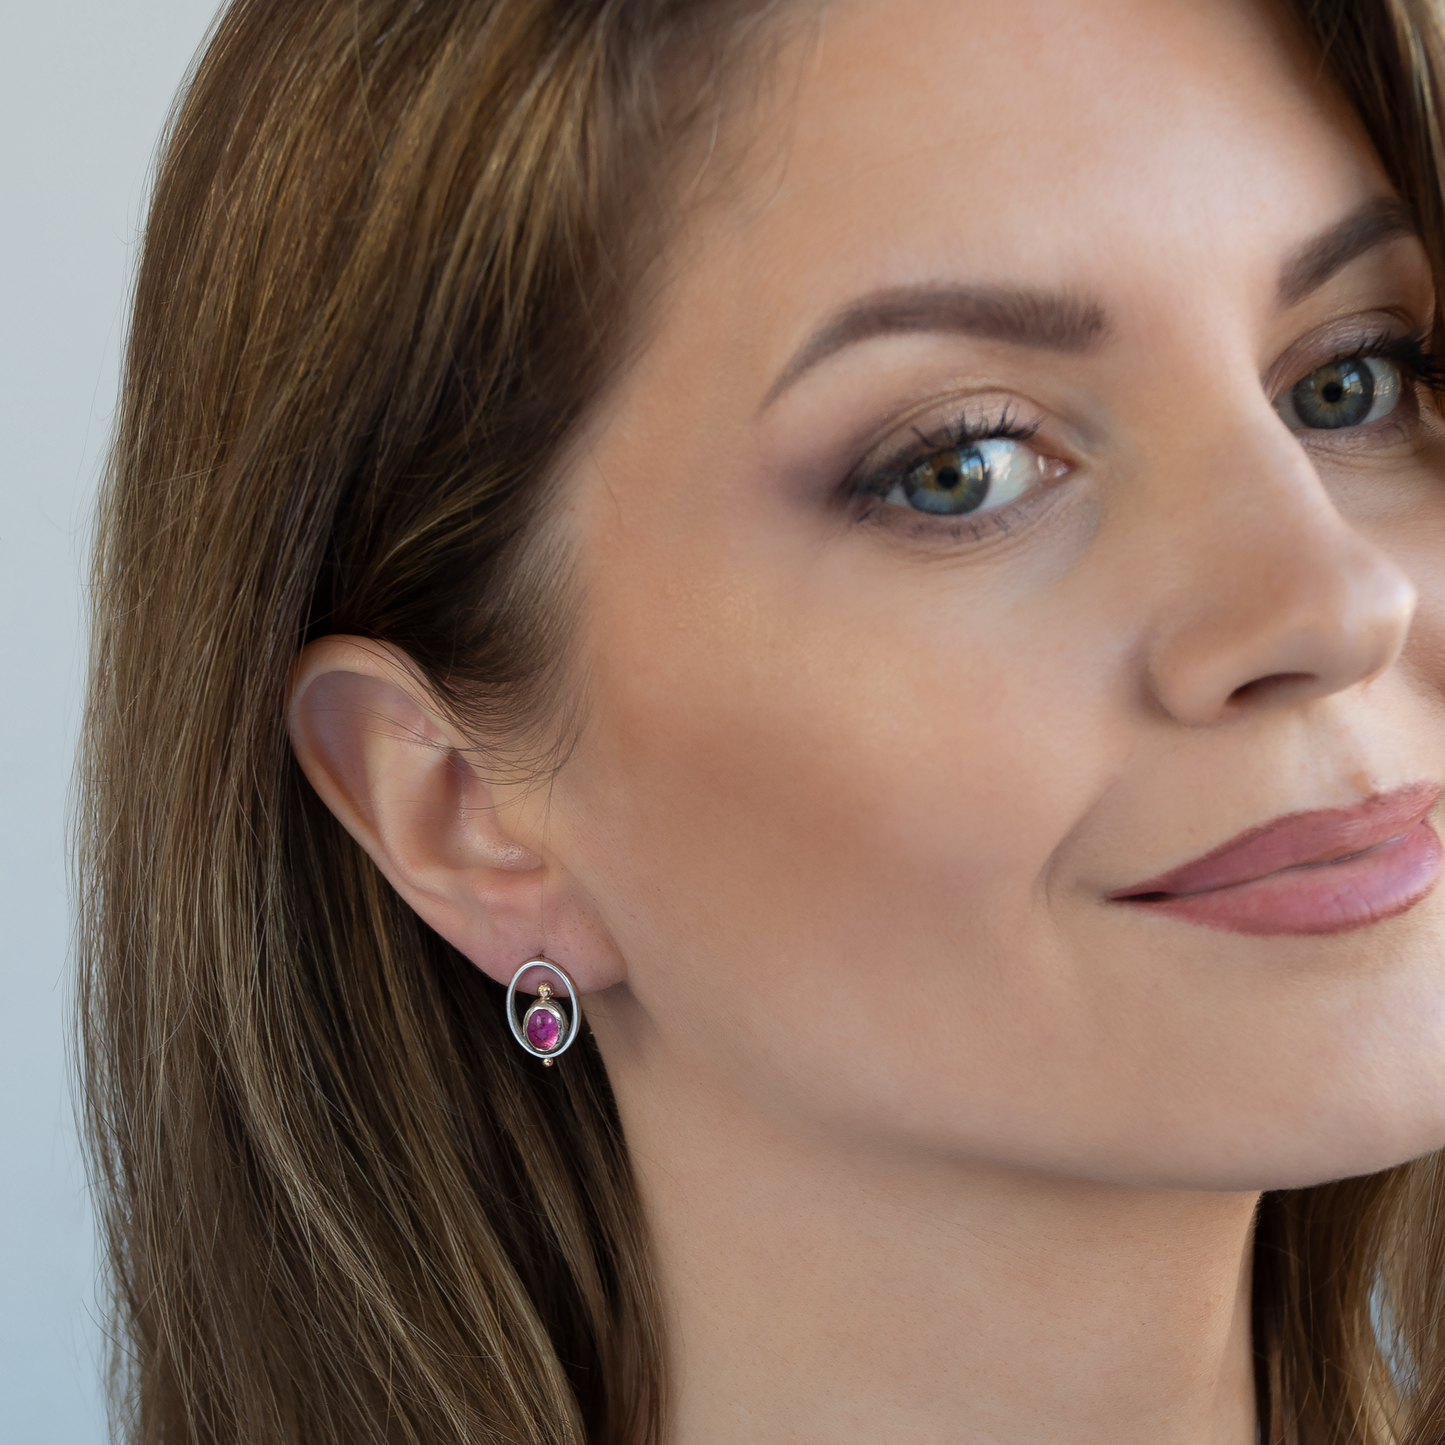 Minimalistic Rose Tourmaline, Sterling Silver, Frame Earrings With Gold Beads